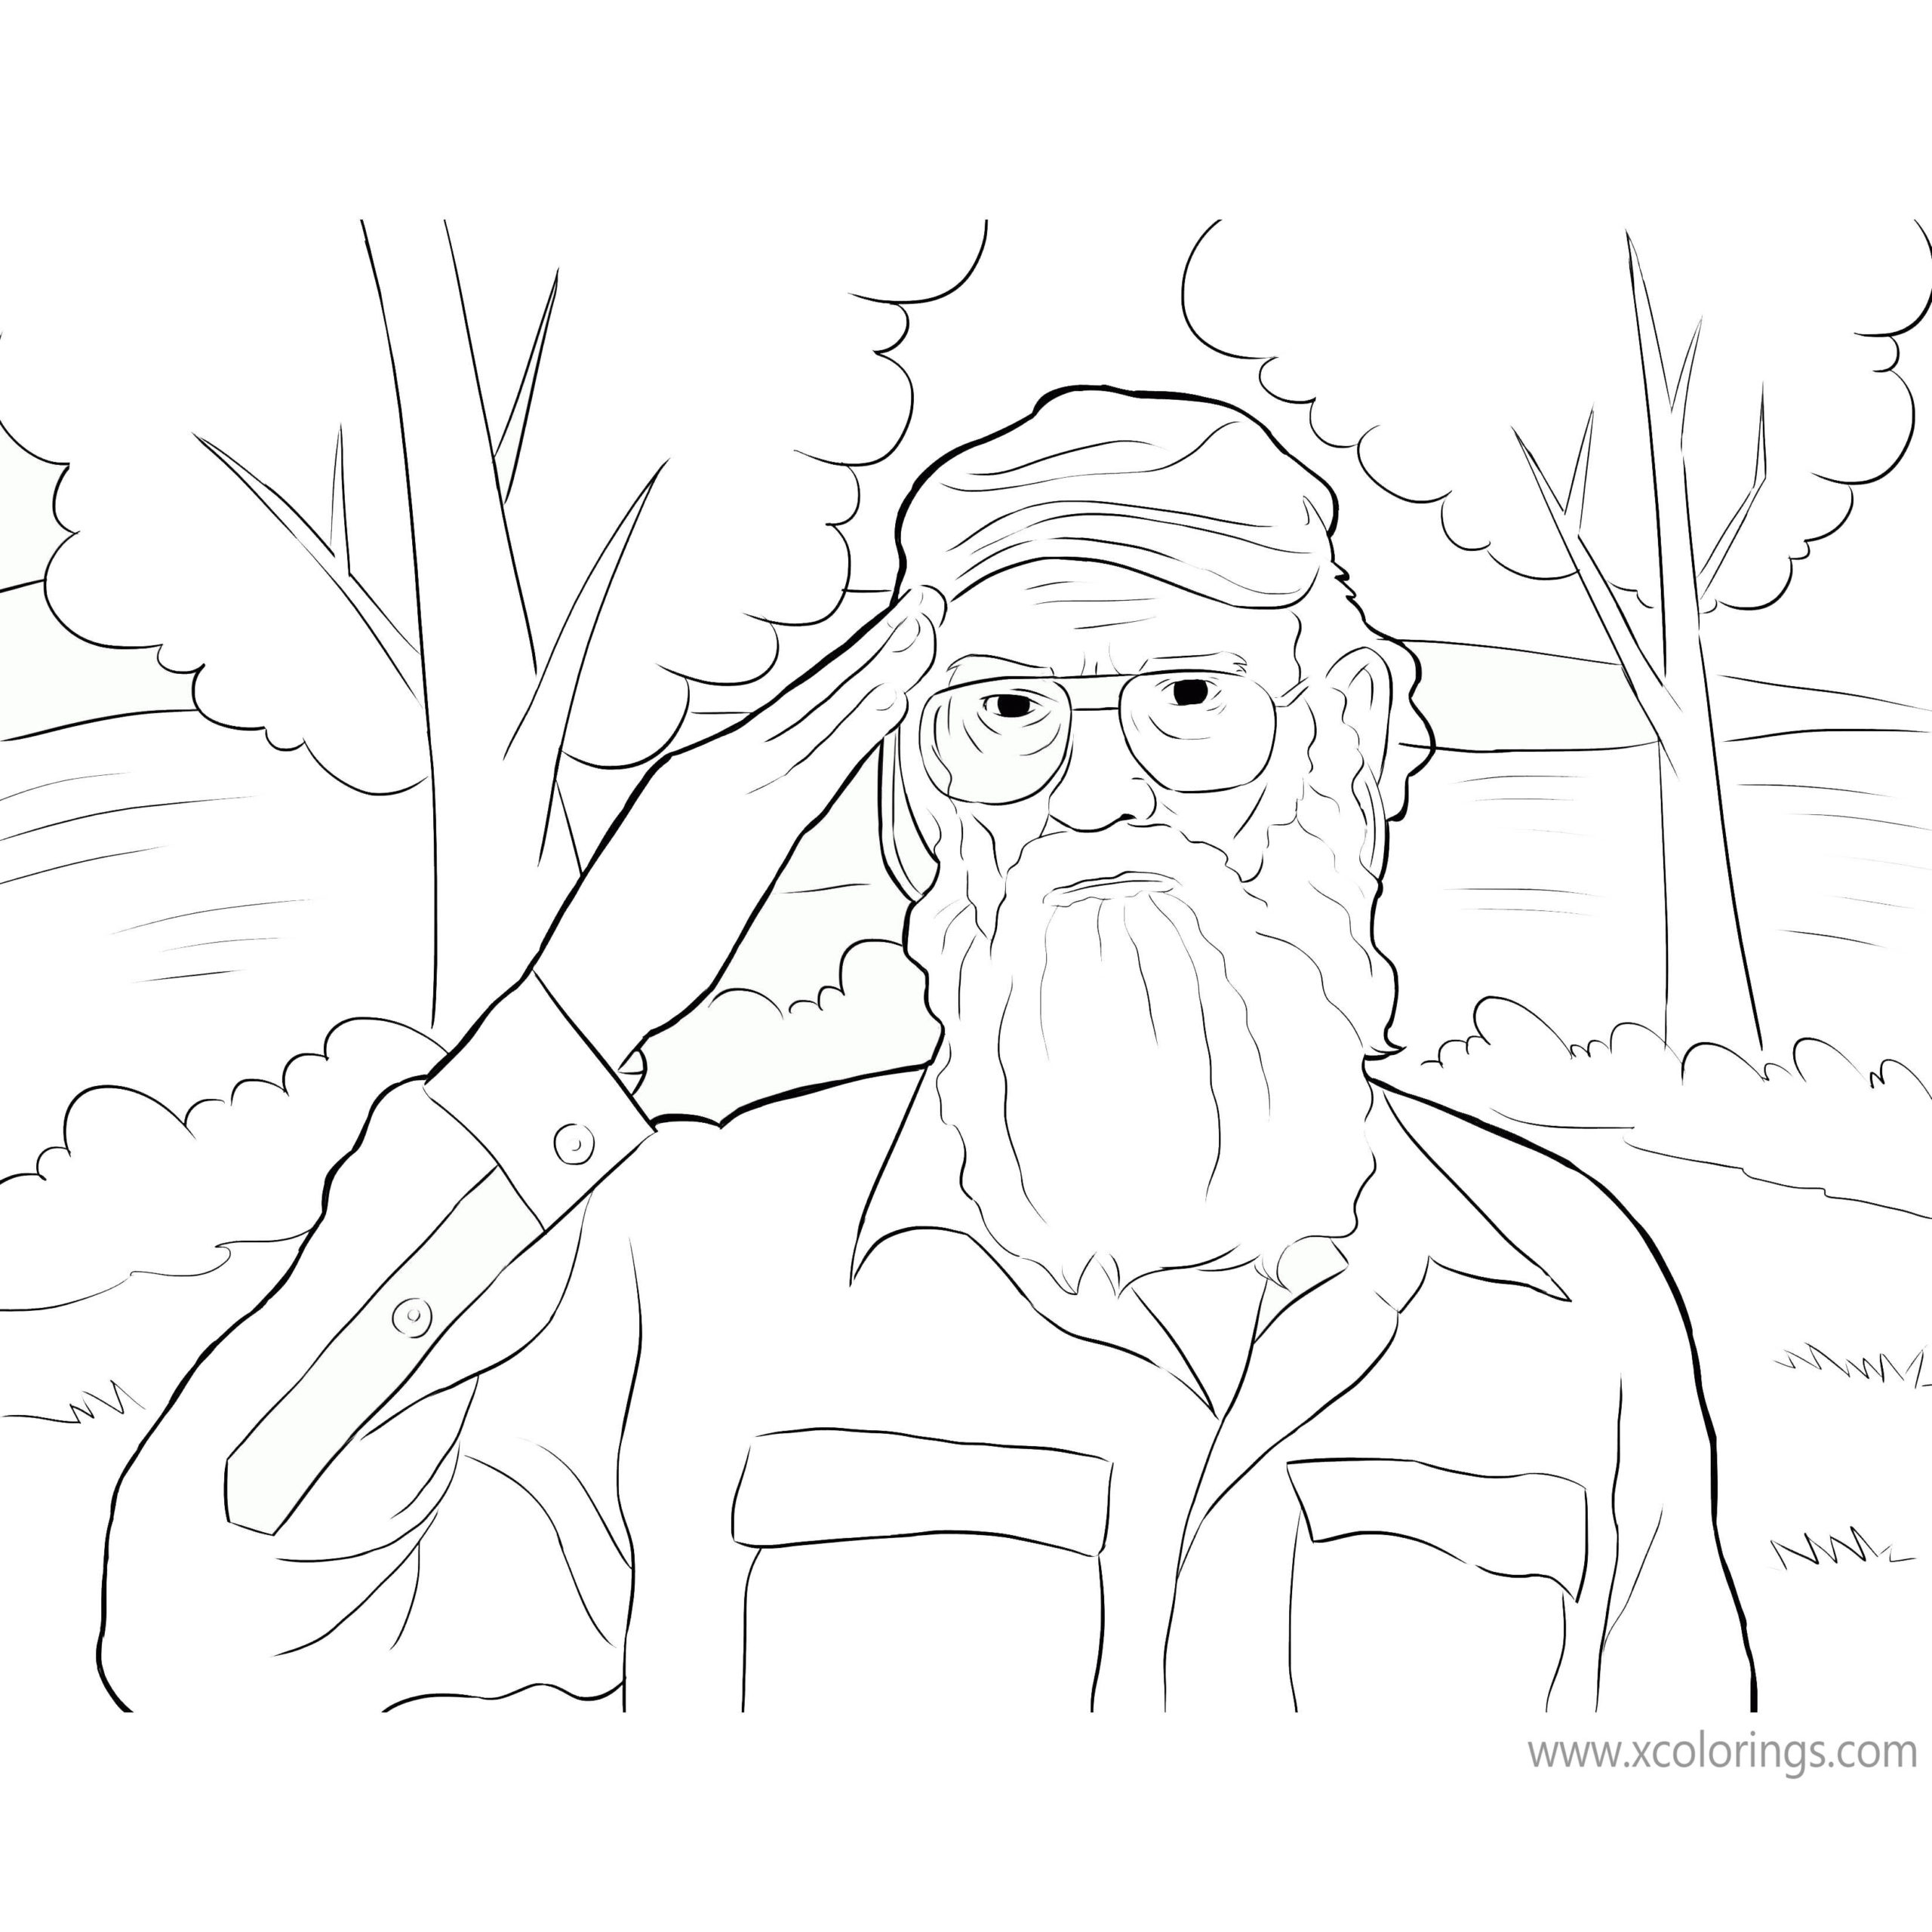 duck-dynasty-coloring-pages-printable-xcolorings